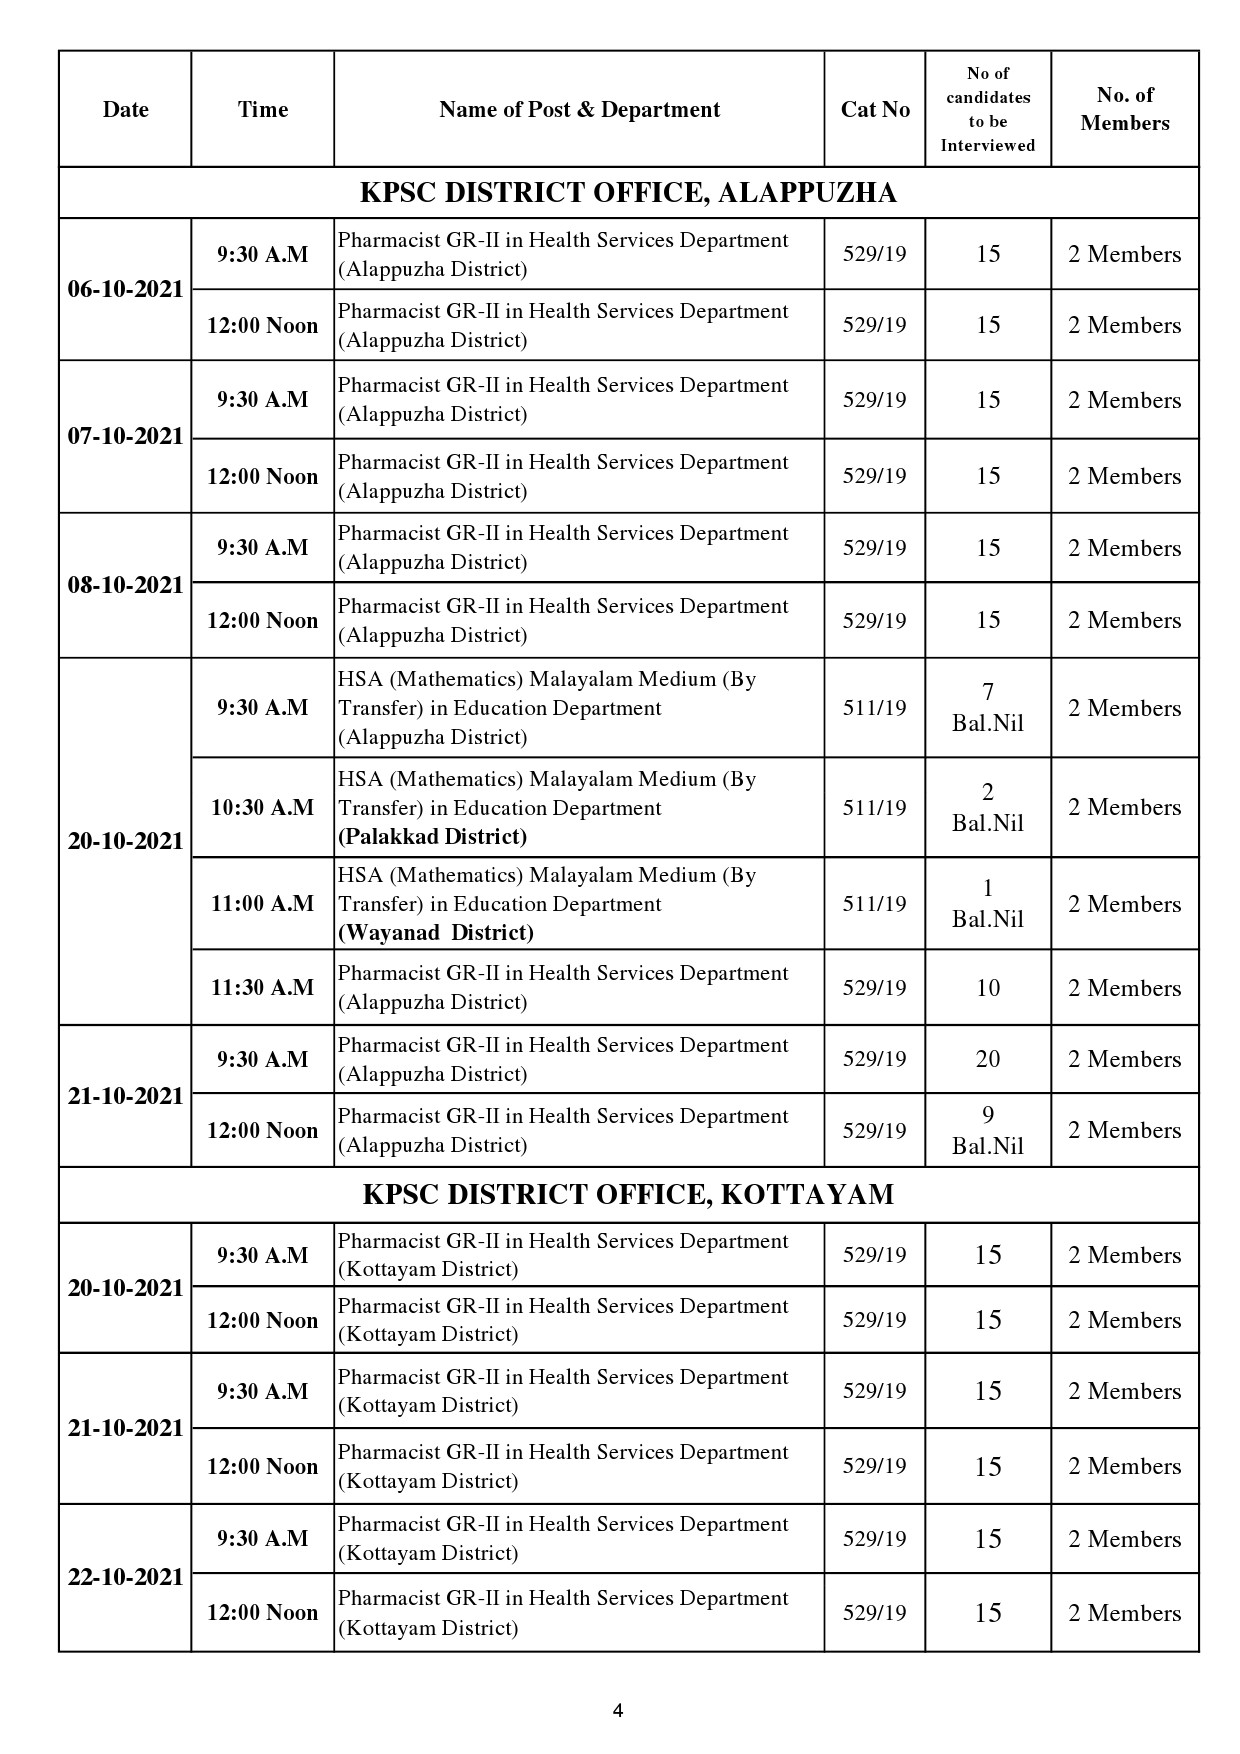 KPSC Interview Programme For The Month Of October 2021 - Notification Image 4